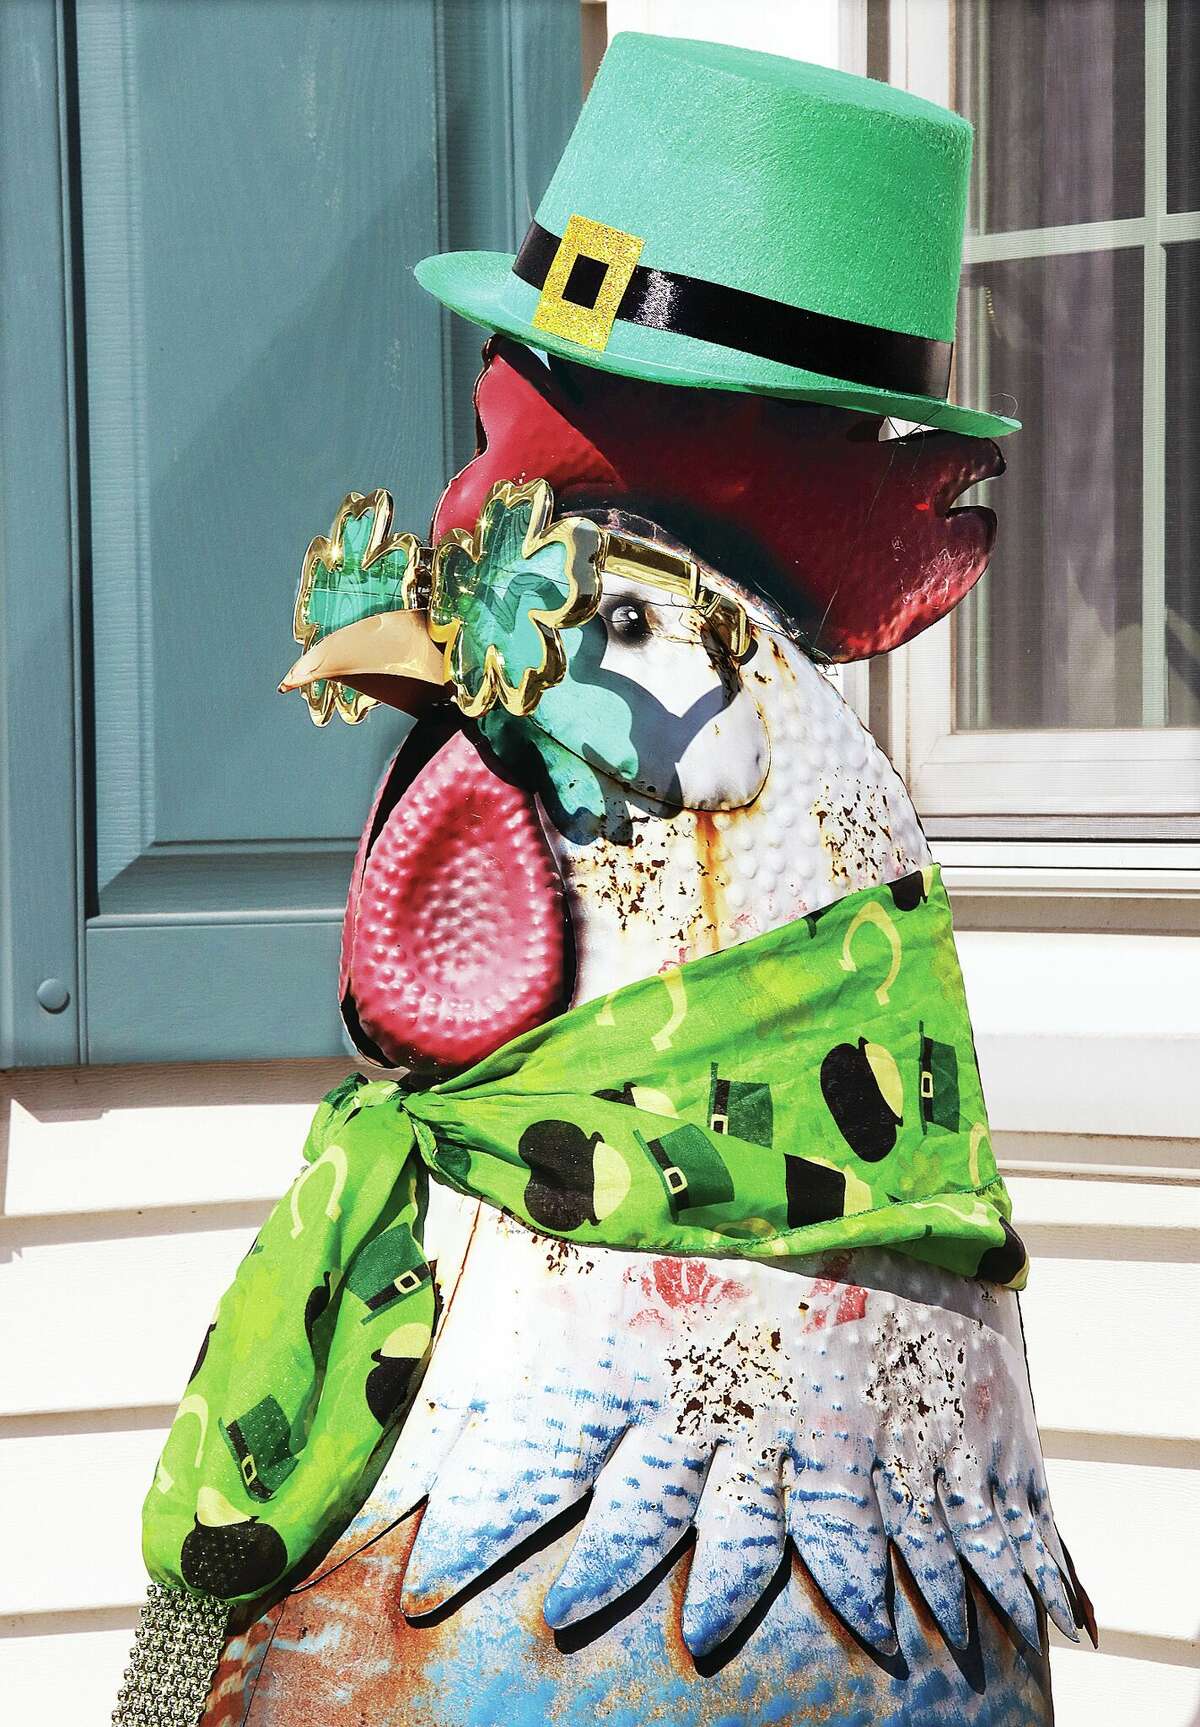 For some, St. Patricks Day is something to crow about. At least it looked that way for a 4-foot-tall, steel rooster in the front yard of a house in the 1800 block of State Street in Alton Friday. Wearing a green hat, four-leaf clover shaped green sunglasses and a green scarf, he looked ready to celebrate the life of St. Patrick and the arrival of Christianity in Ireland.